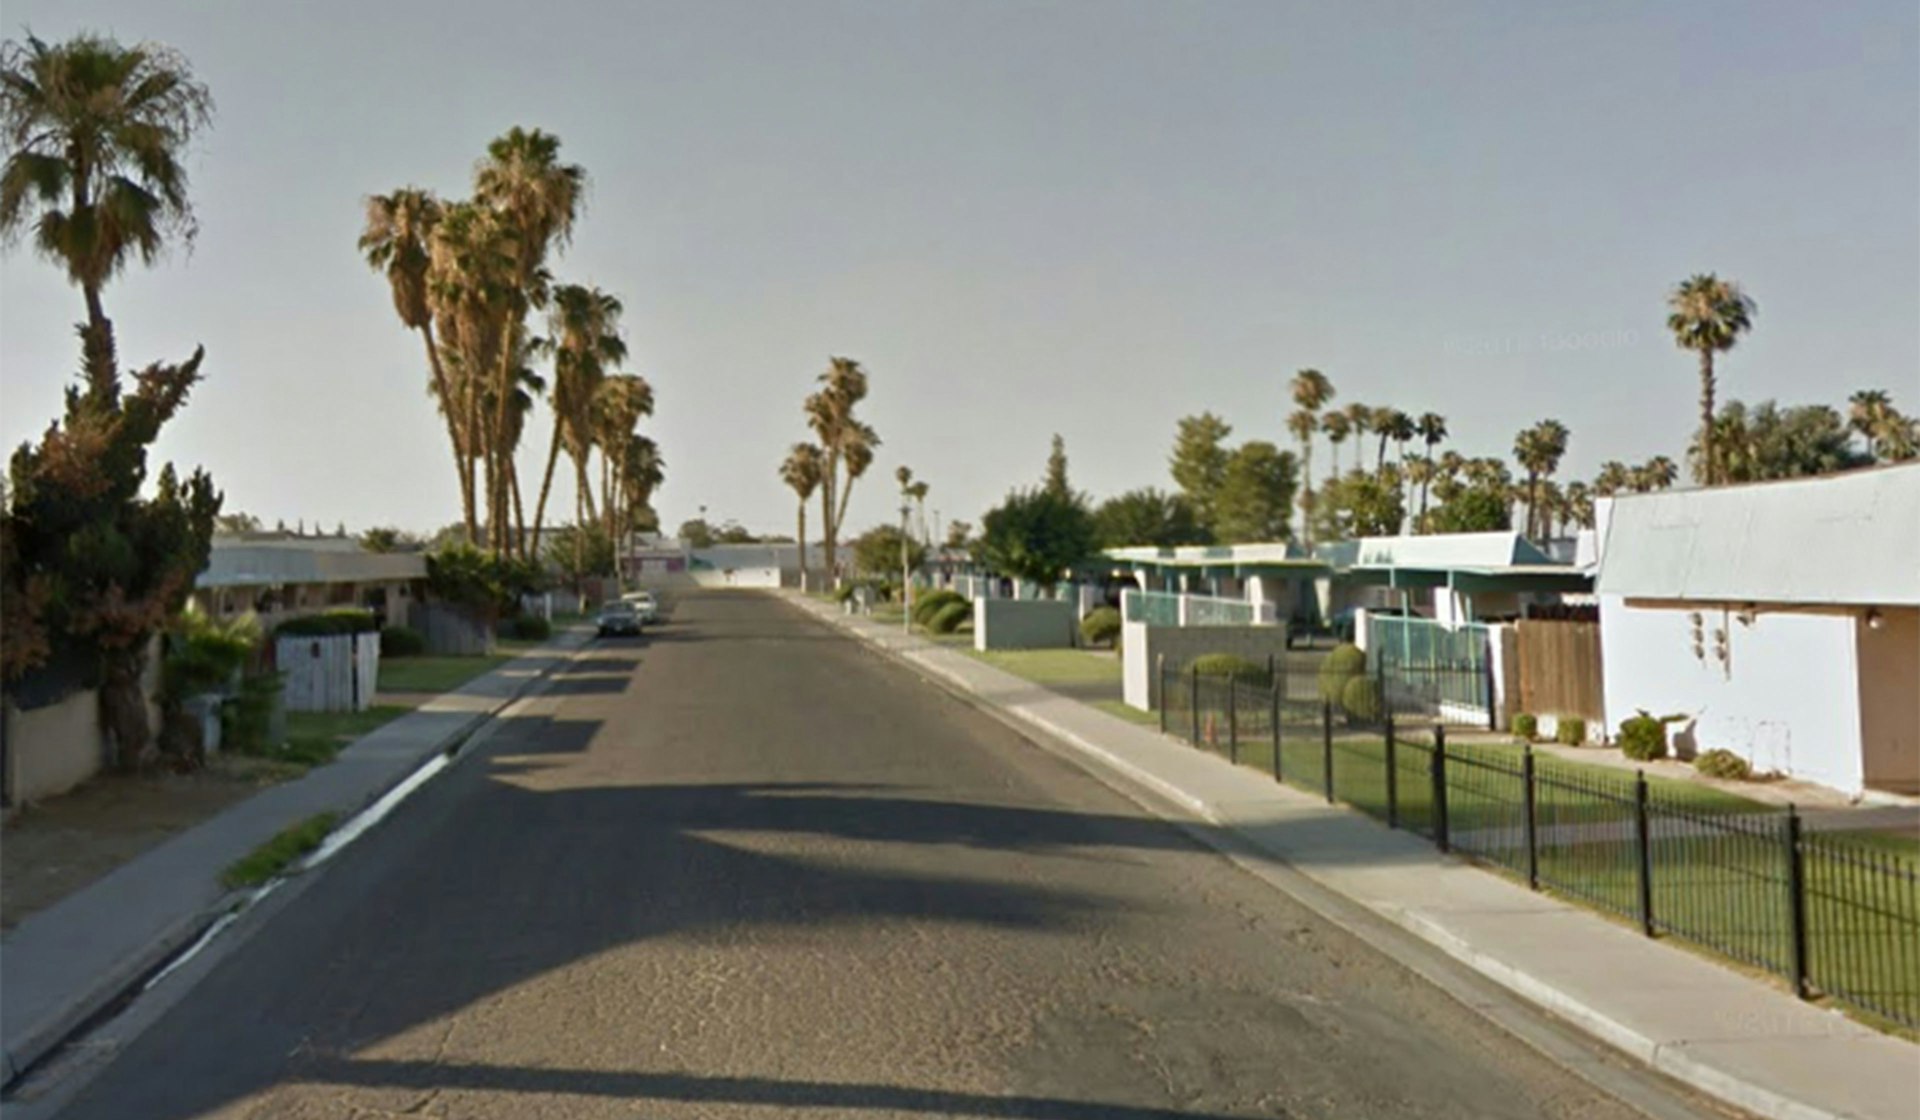 Photographer uses Google Street View to document fatal shootings on Instagram